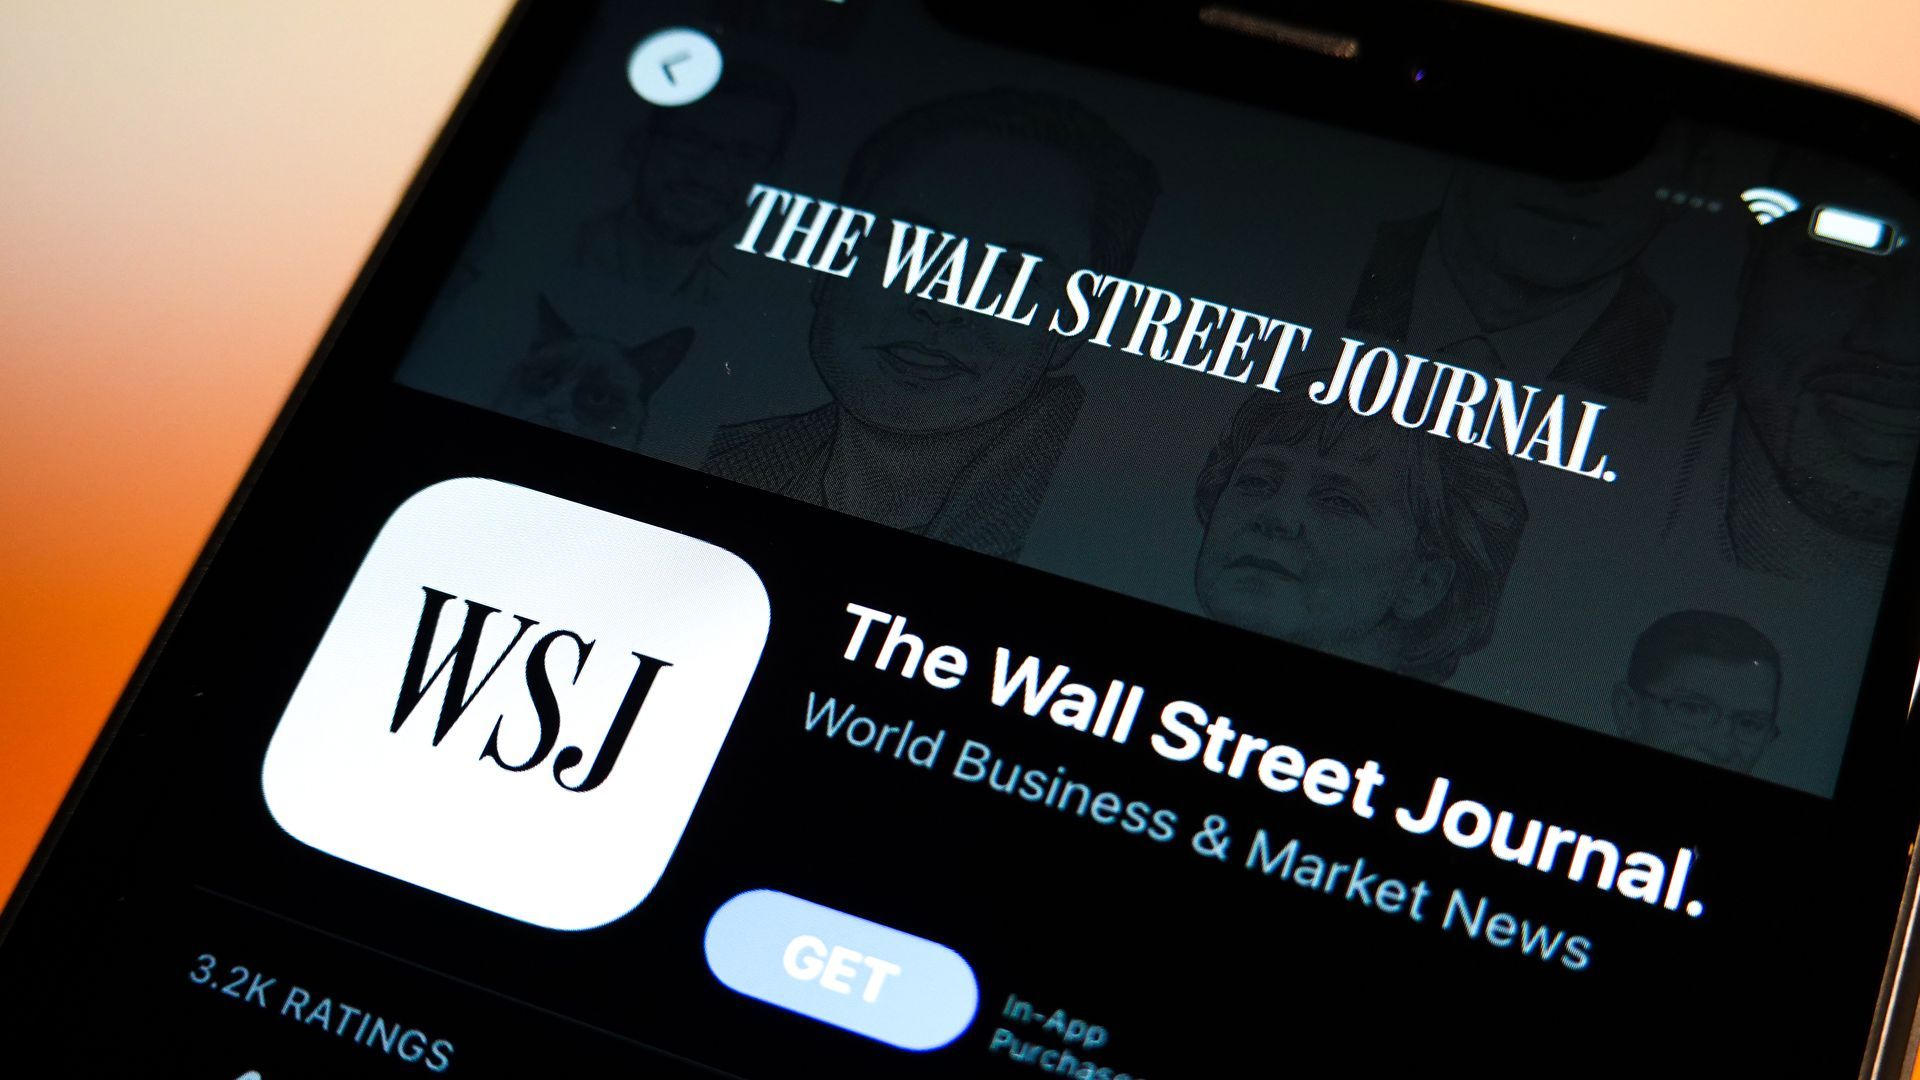 Image of a smartphone displaying the Wall Street Journal logo